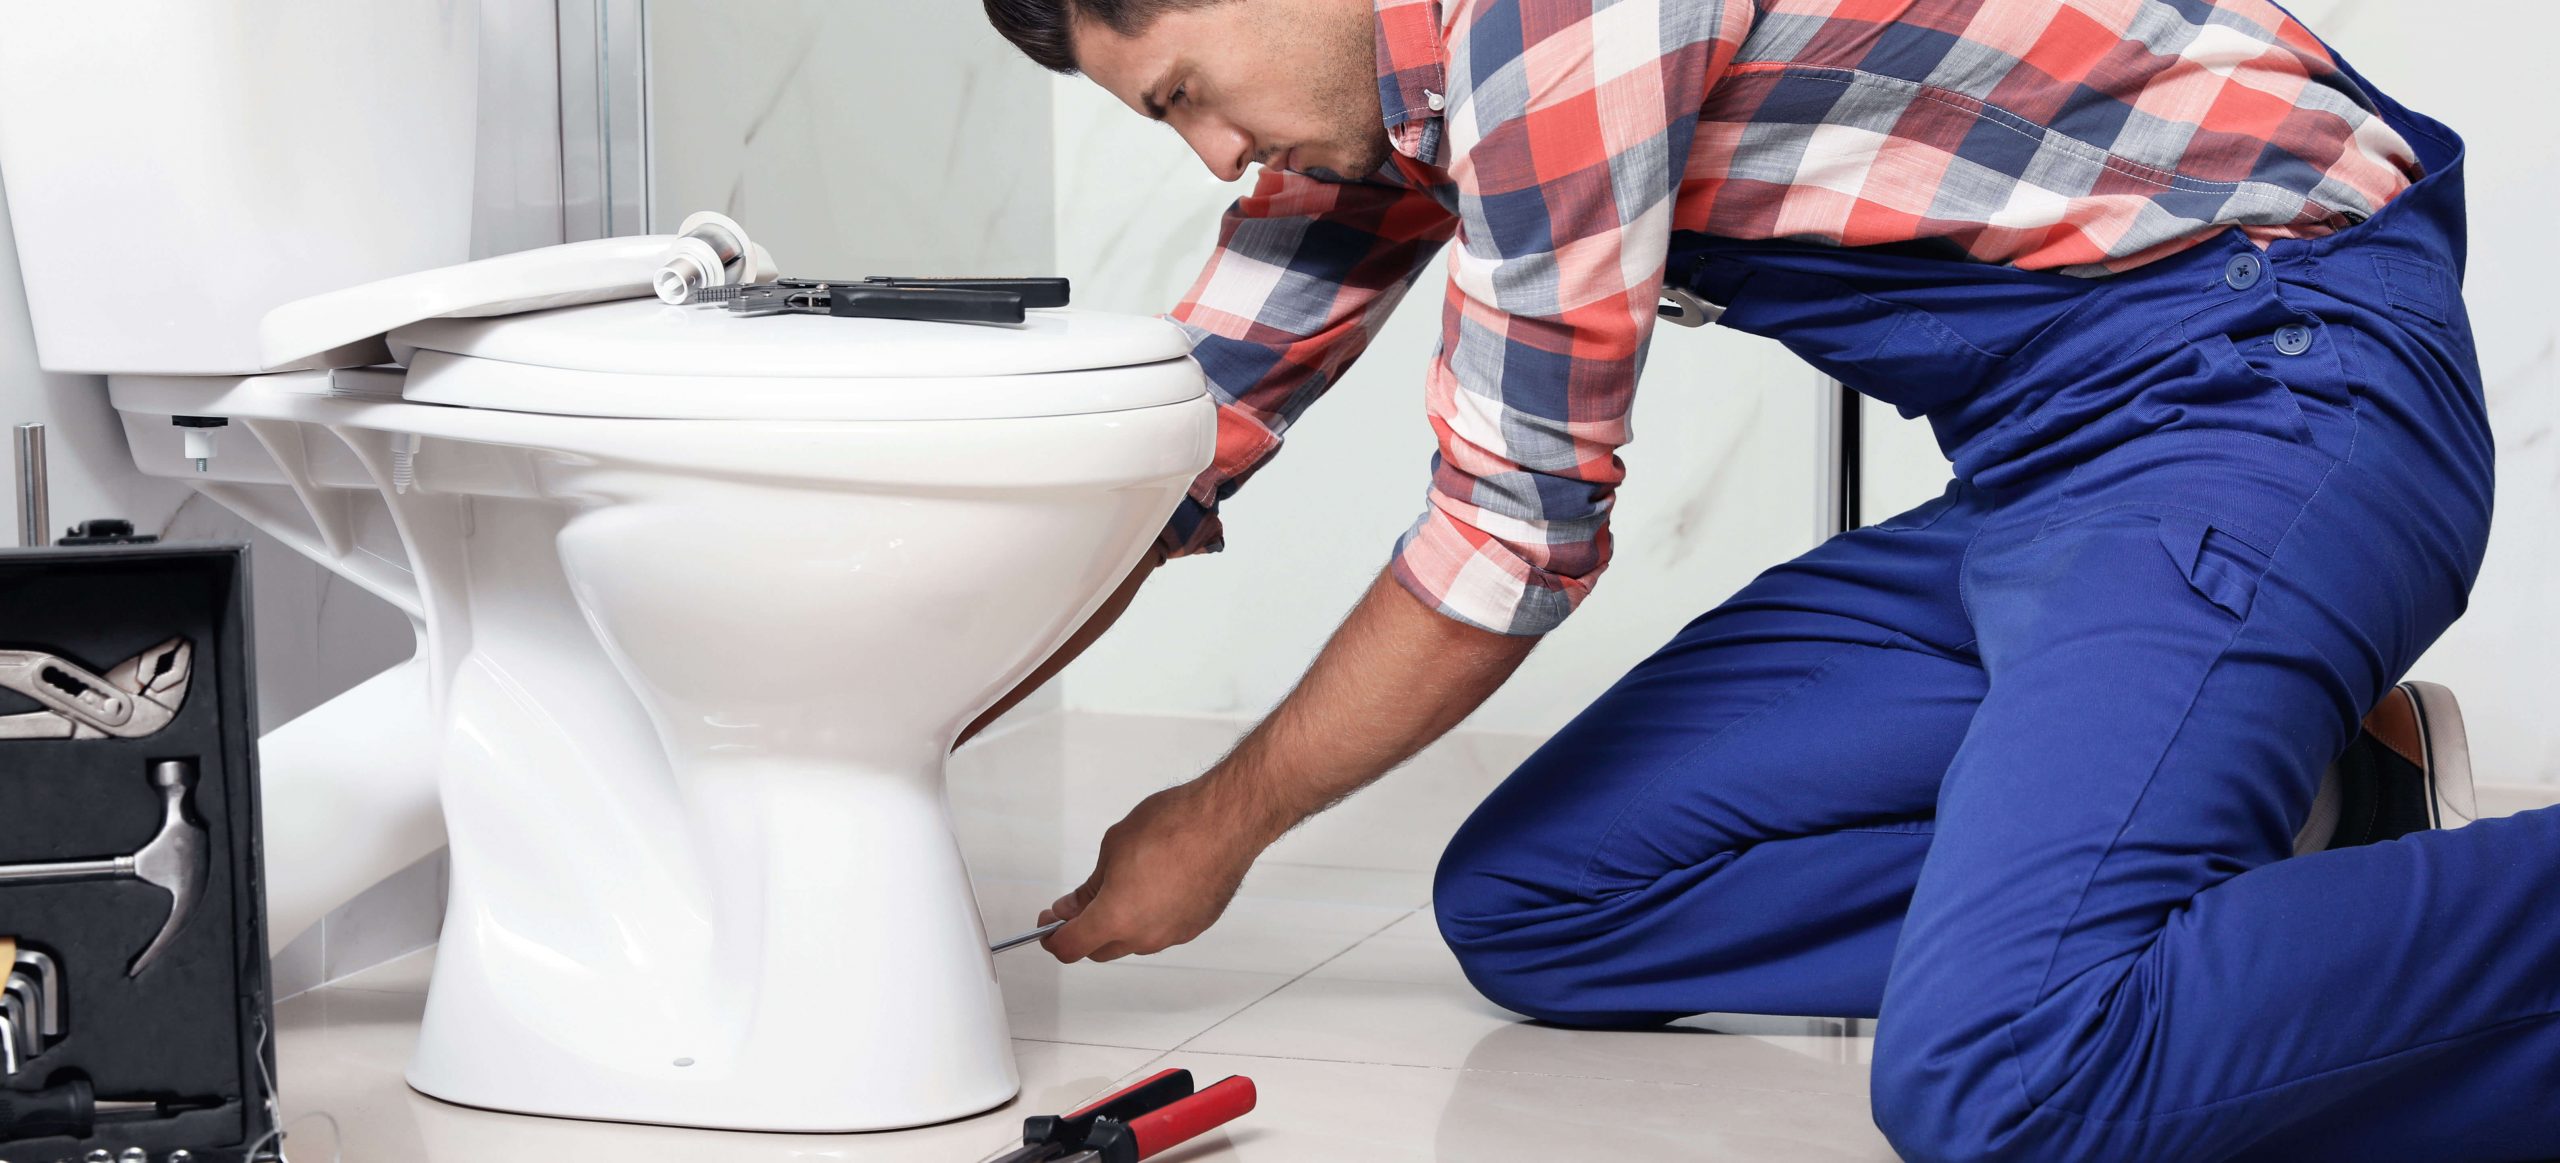 A plumber removing a toilet